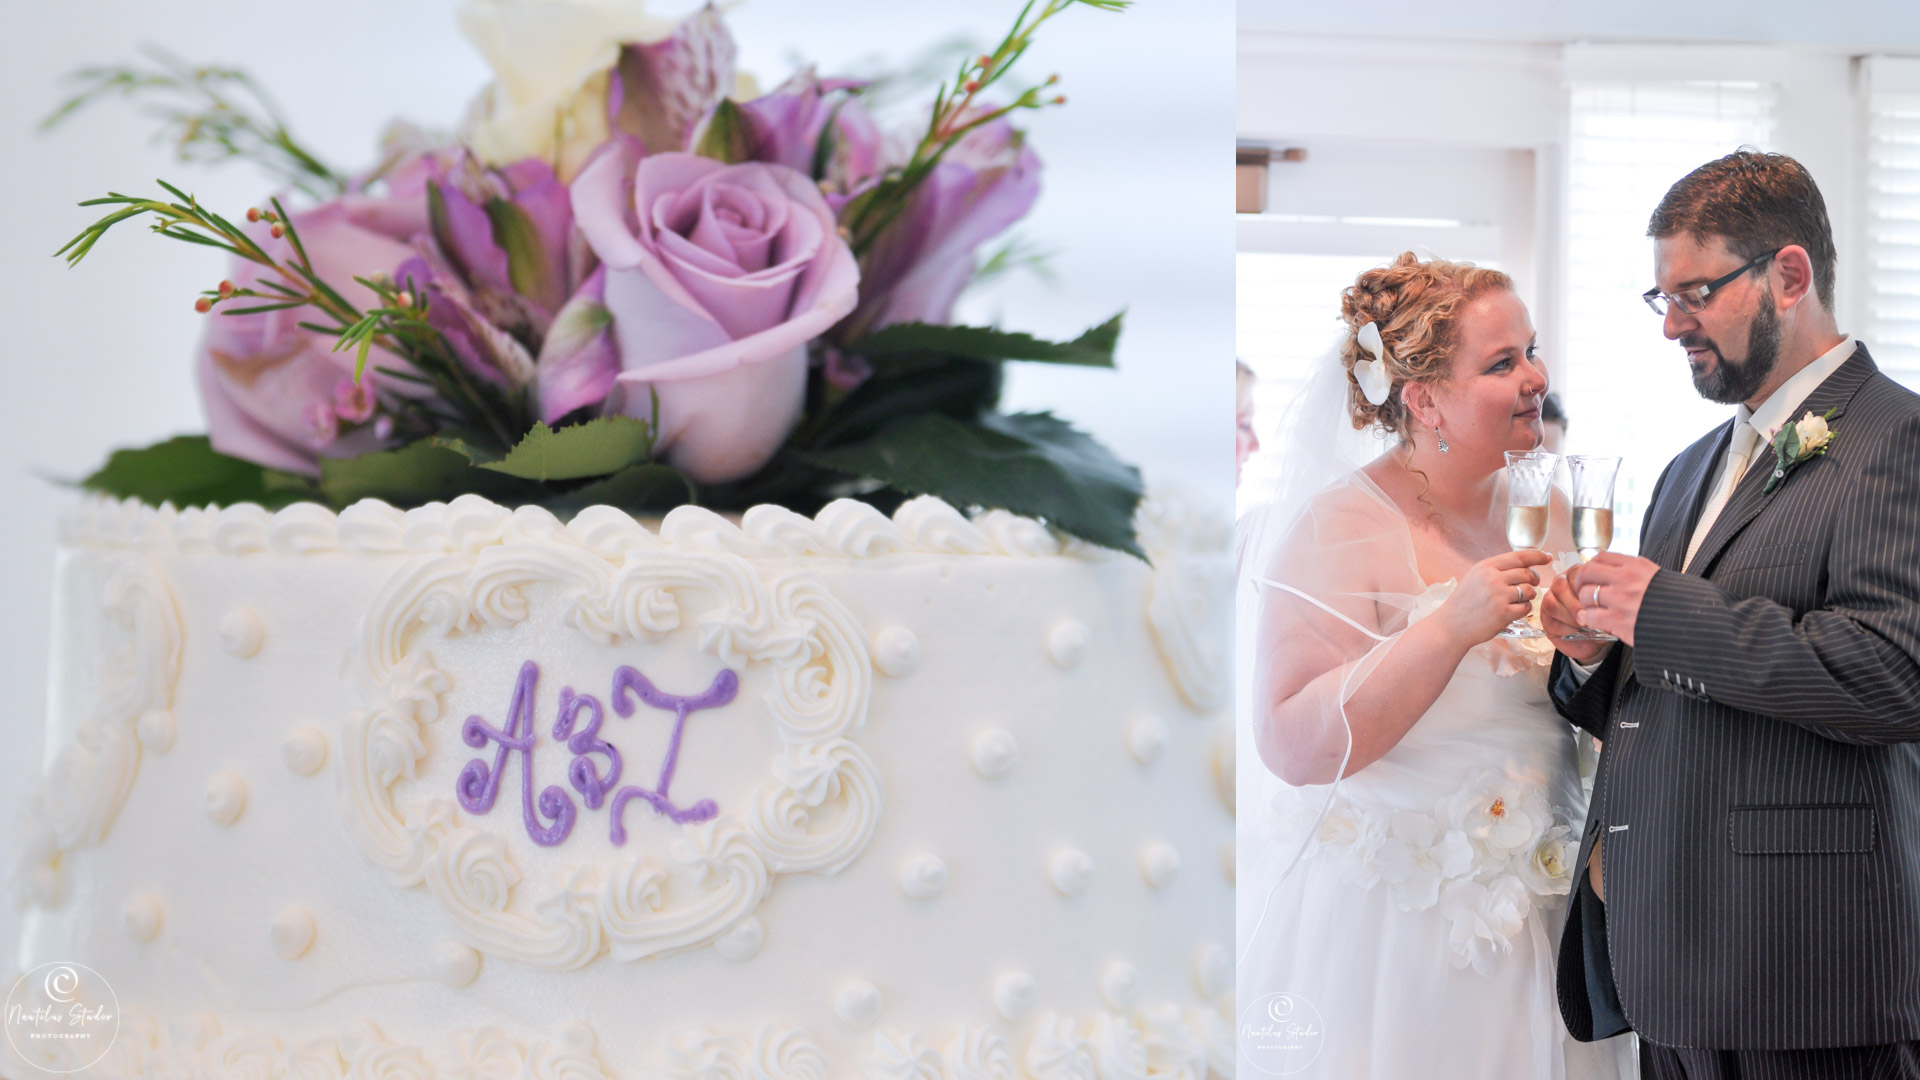 photo of wedding cake and couple toasting with champagne